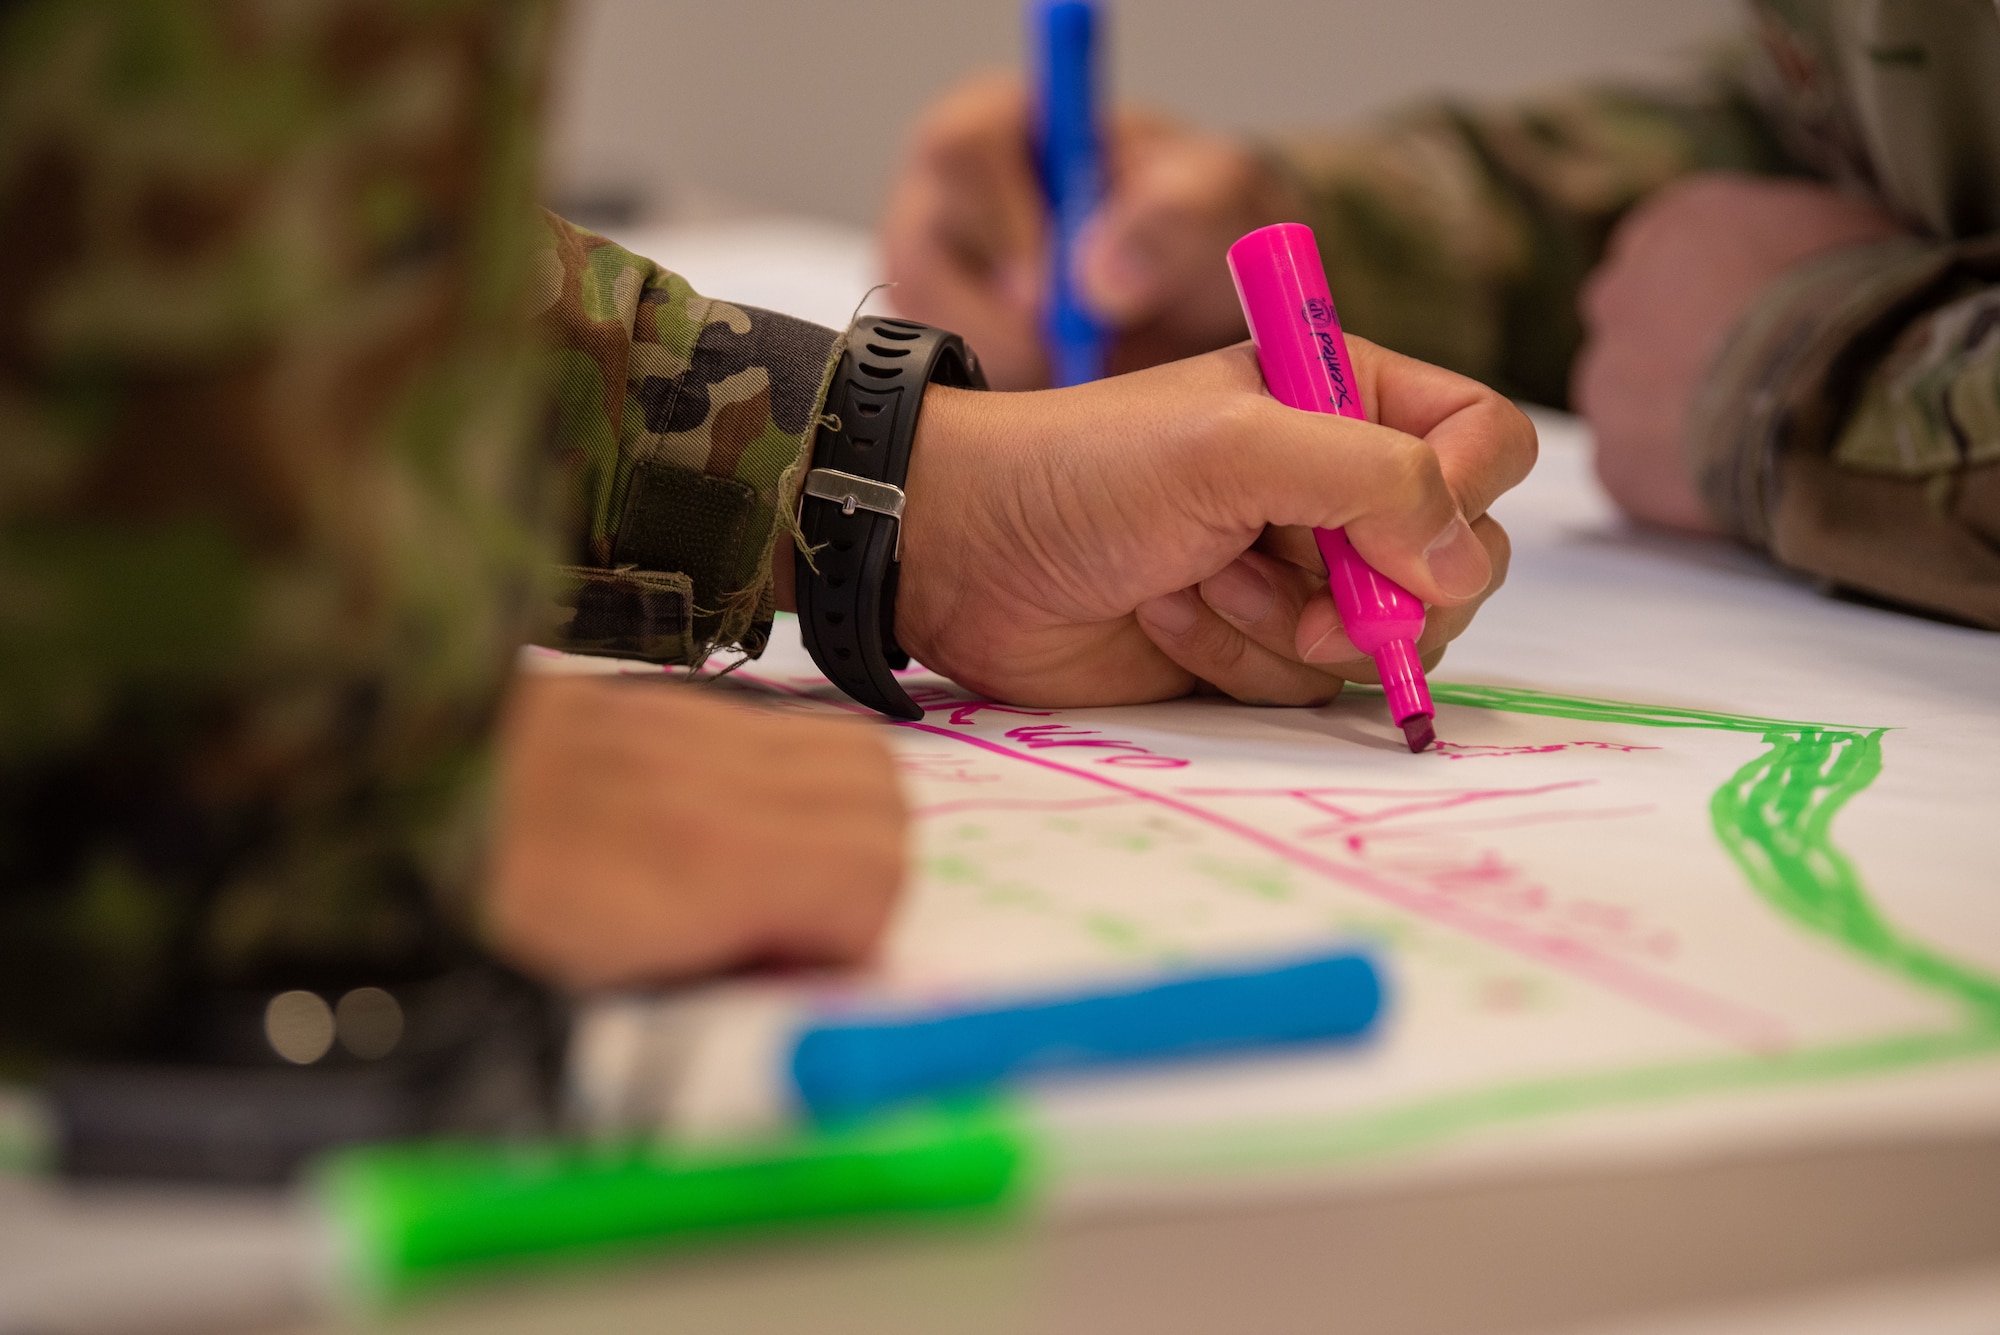 A Japan Ground Self-Defense Force soldier writes for an icebreaker event during Camp Sendai’s Basic English Training Course tour of the Airman Leadership School at Misawa Air Base, Japan, Nov. 8, 2022.